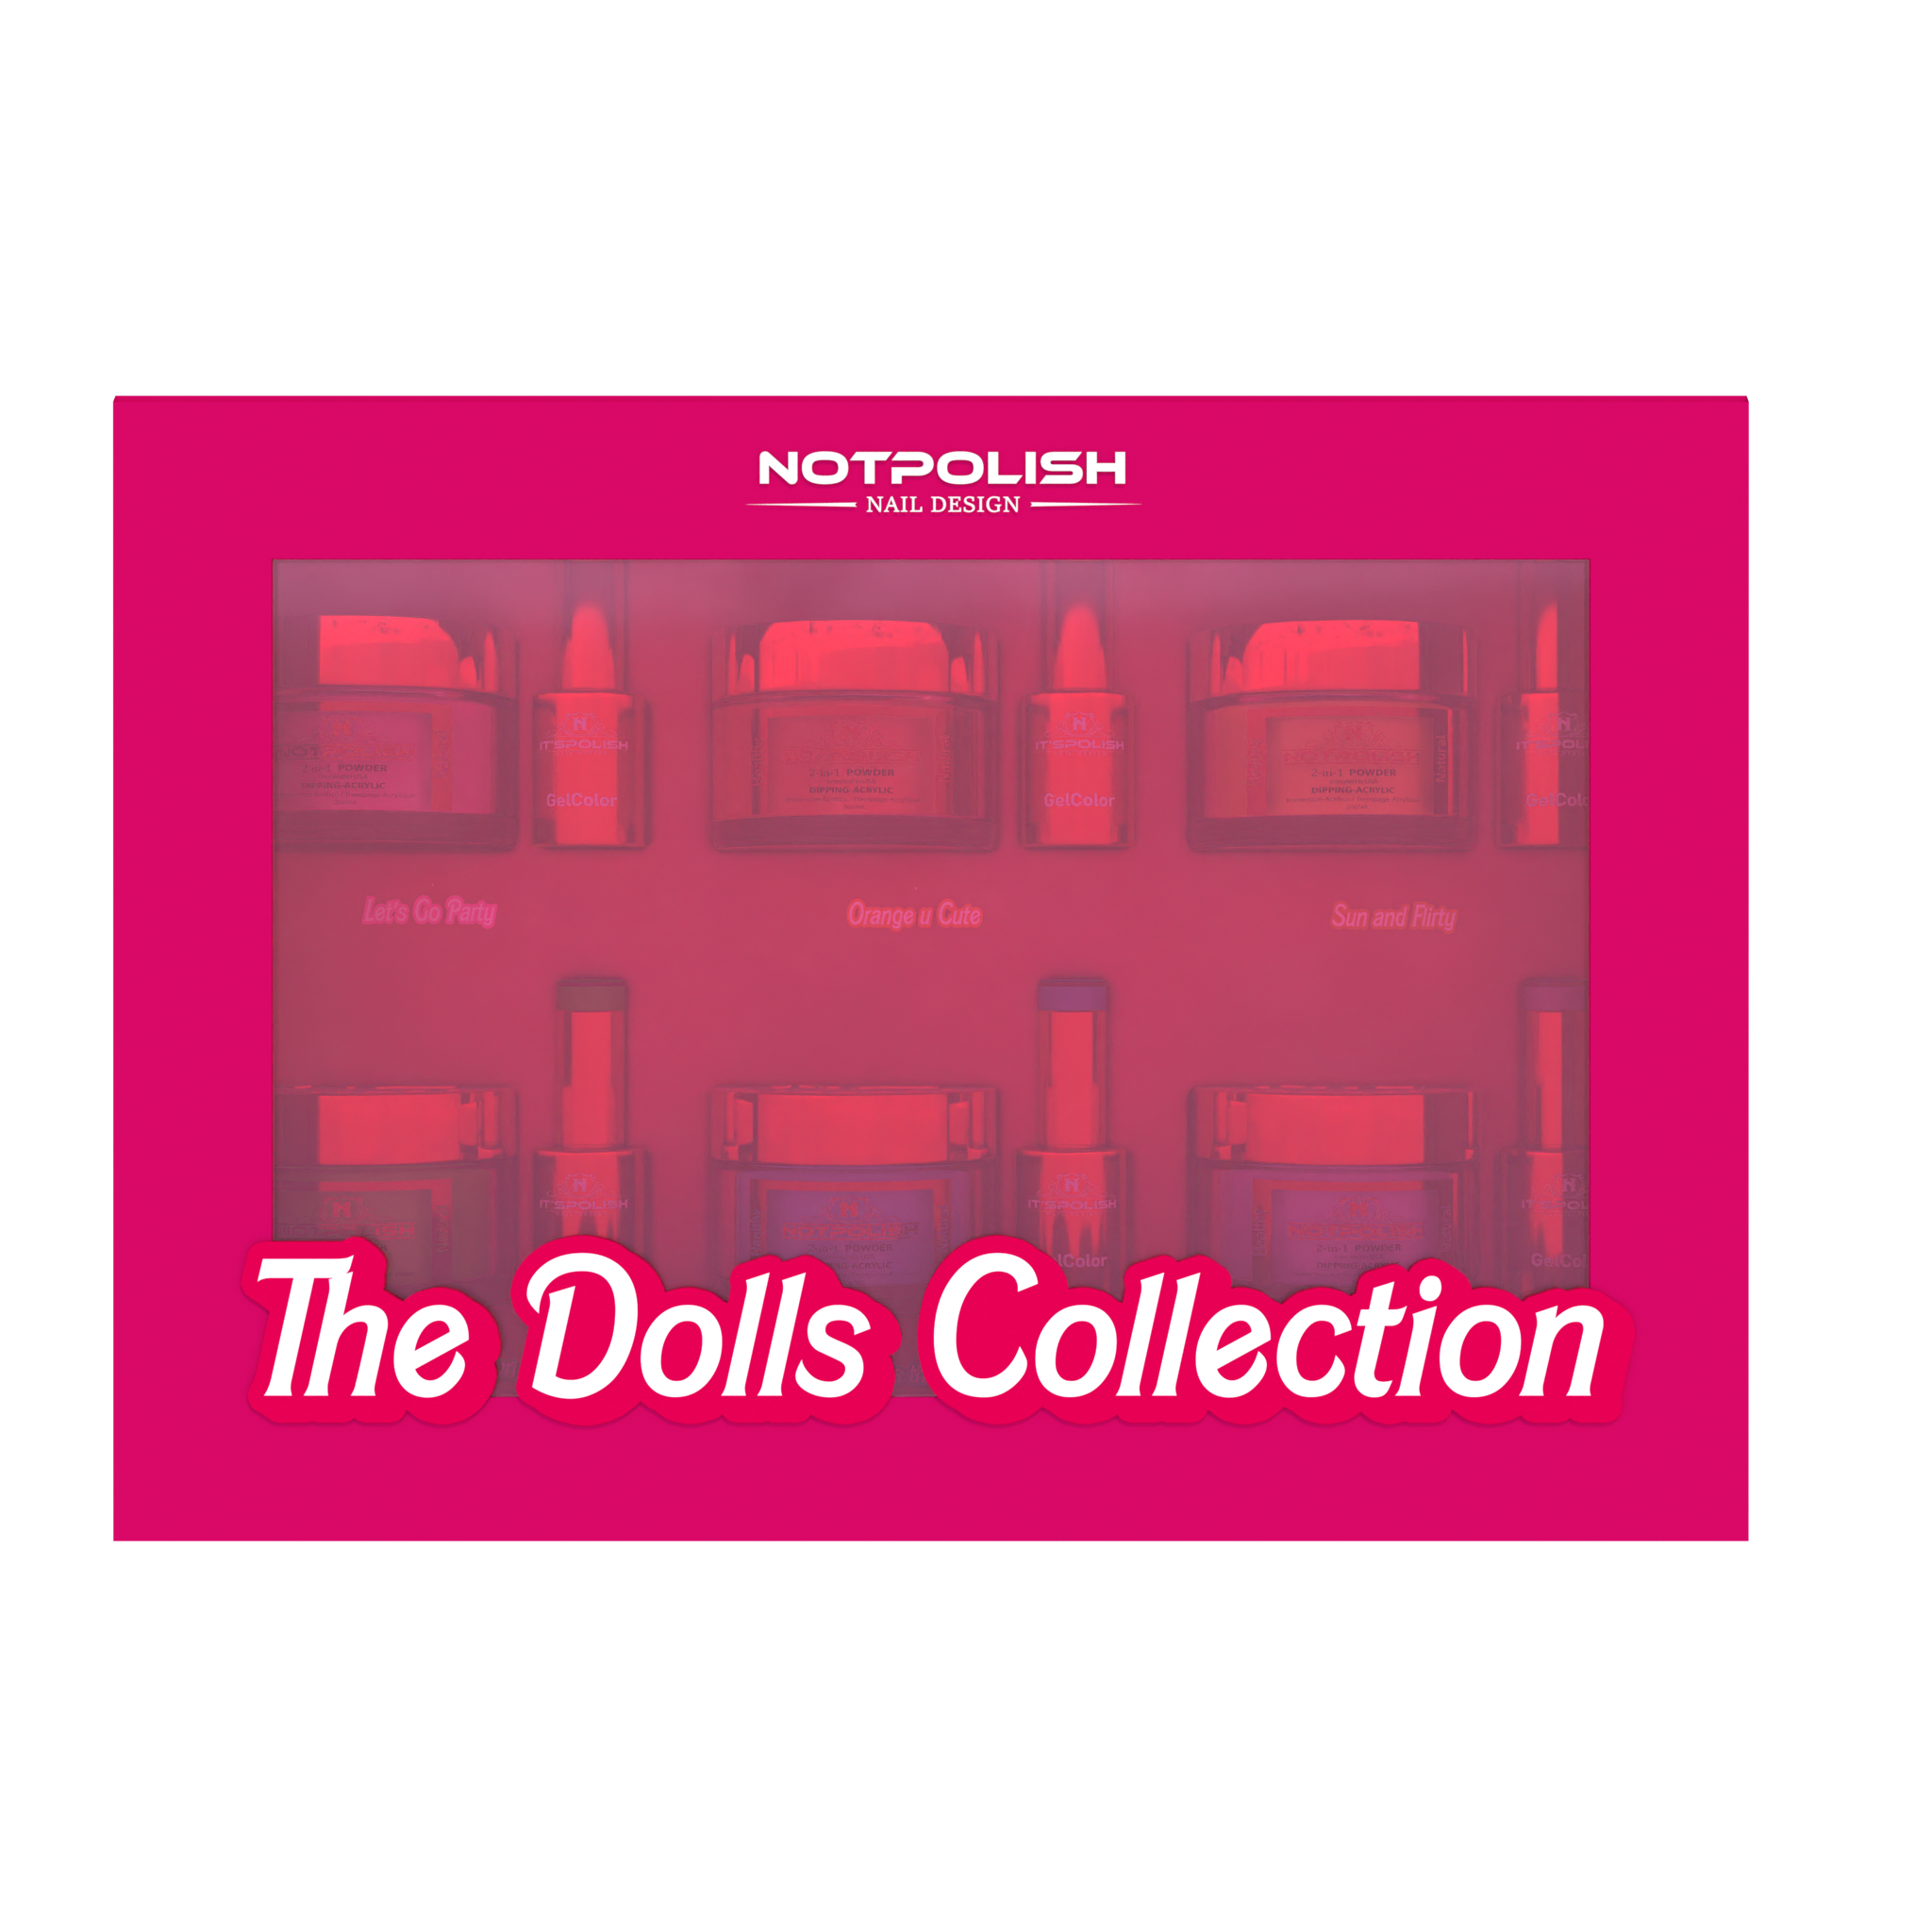 THE DOLLS COMPLETE COLLECTION